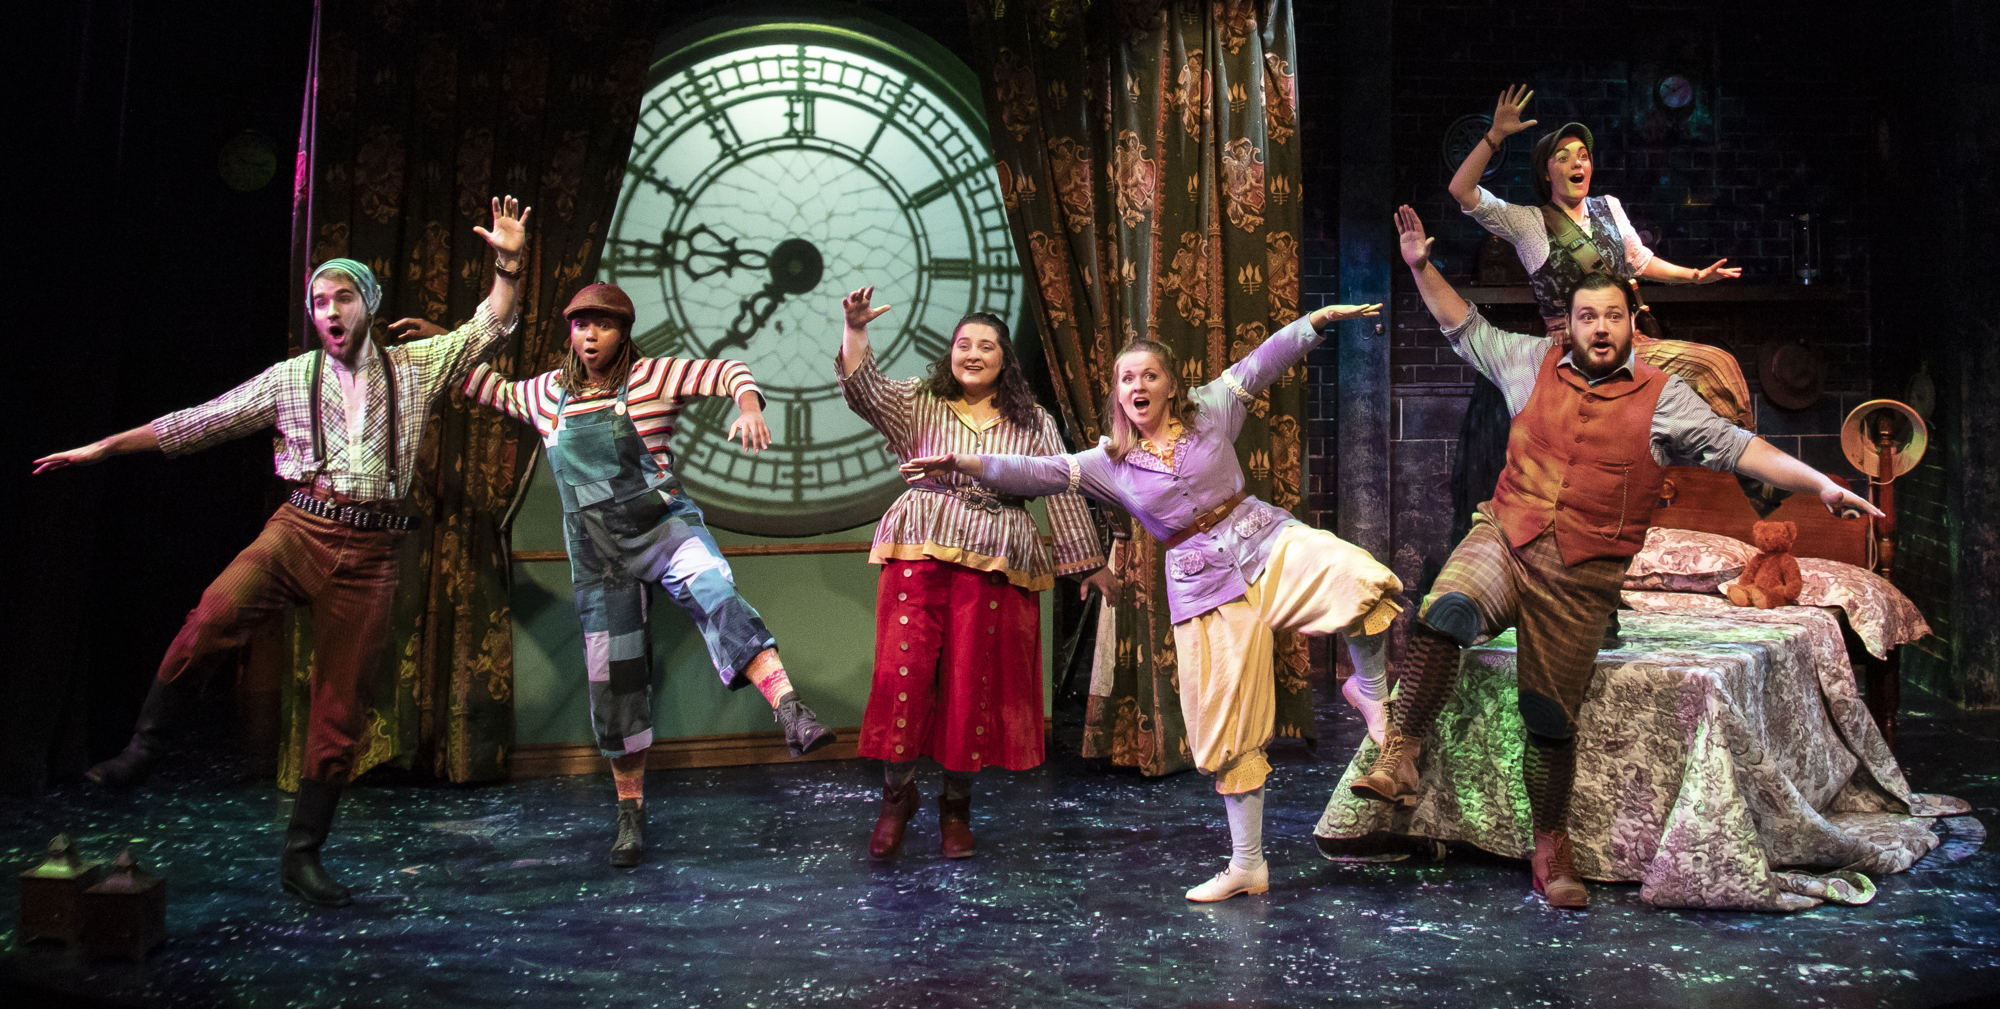 The cast of “Peter Pan” consists of six FST apprentice actors who each play several characters throughout the course of the show. Courtesy photo